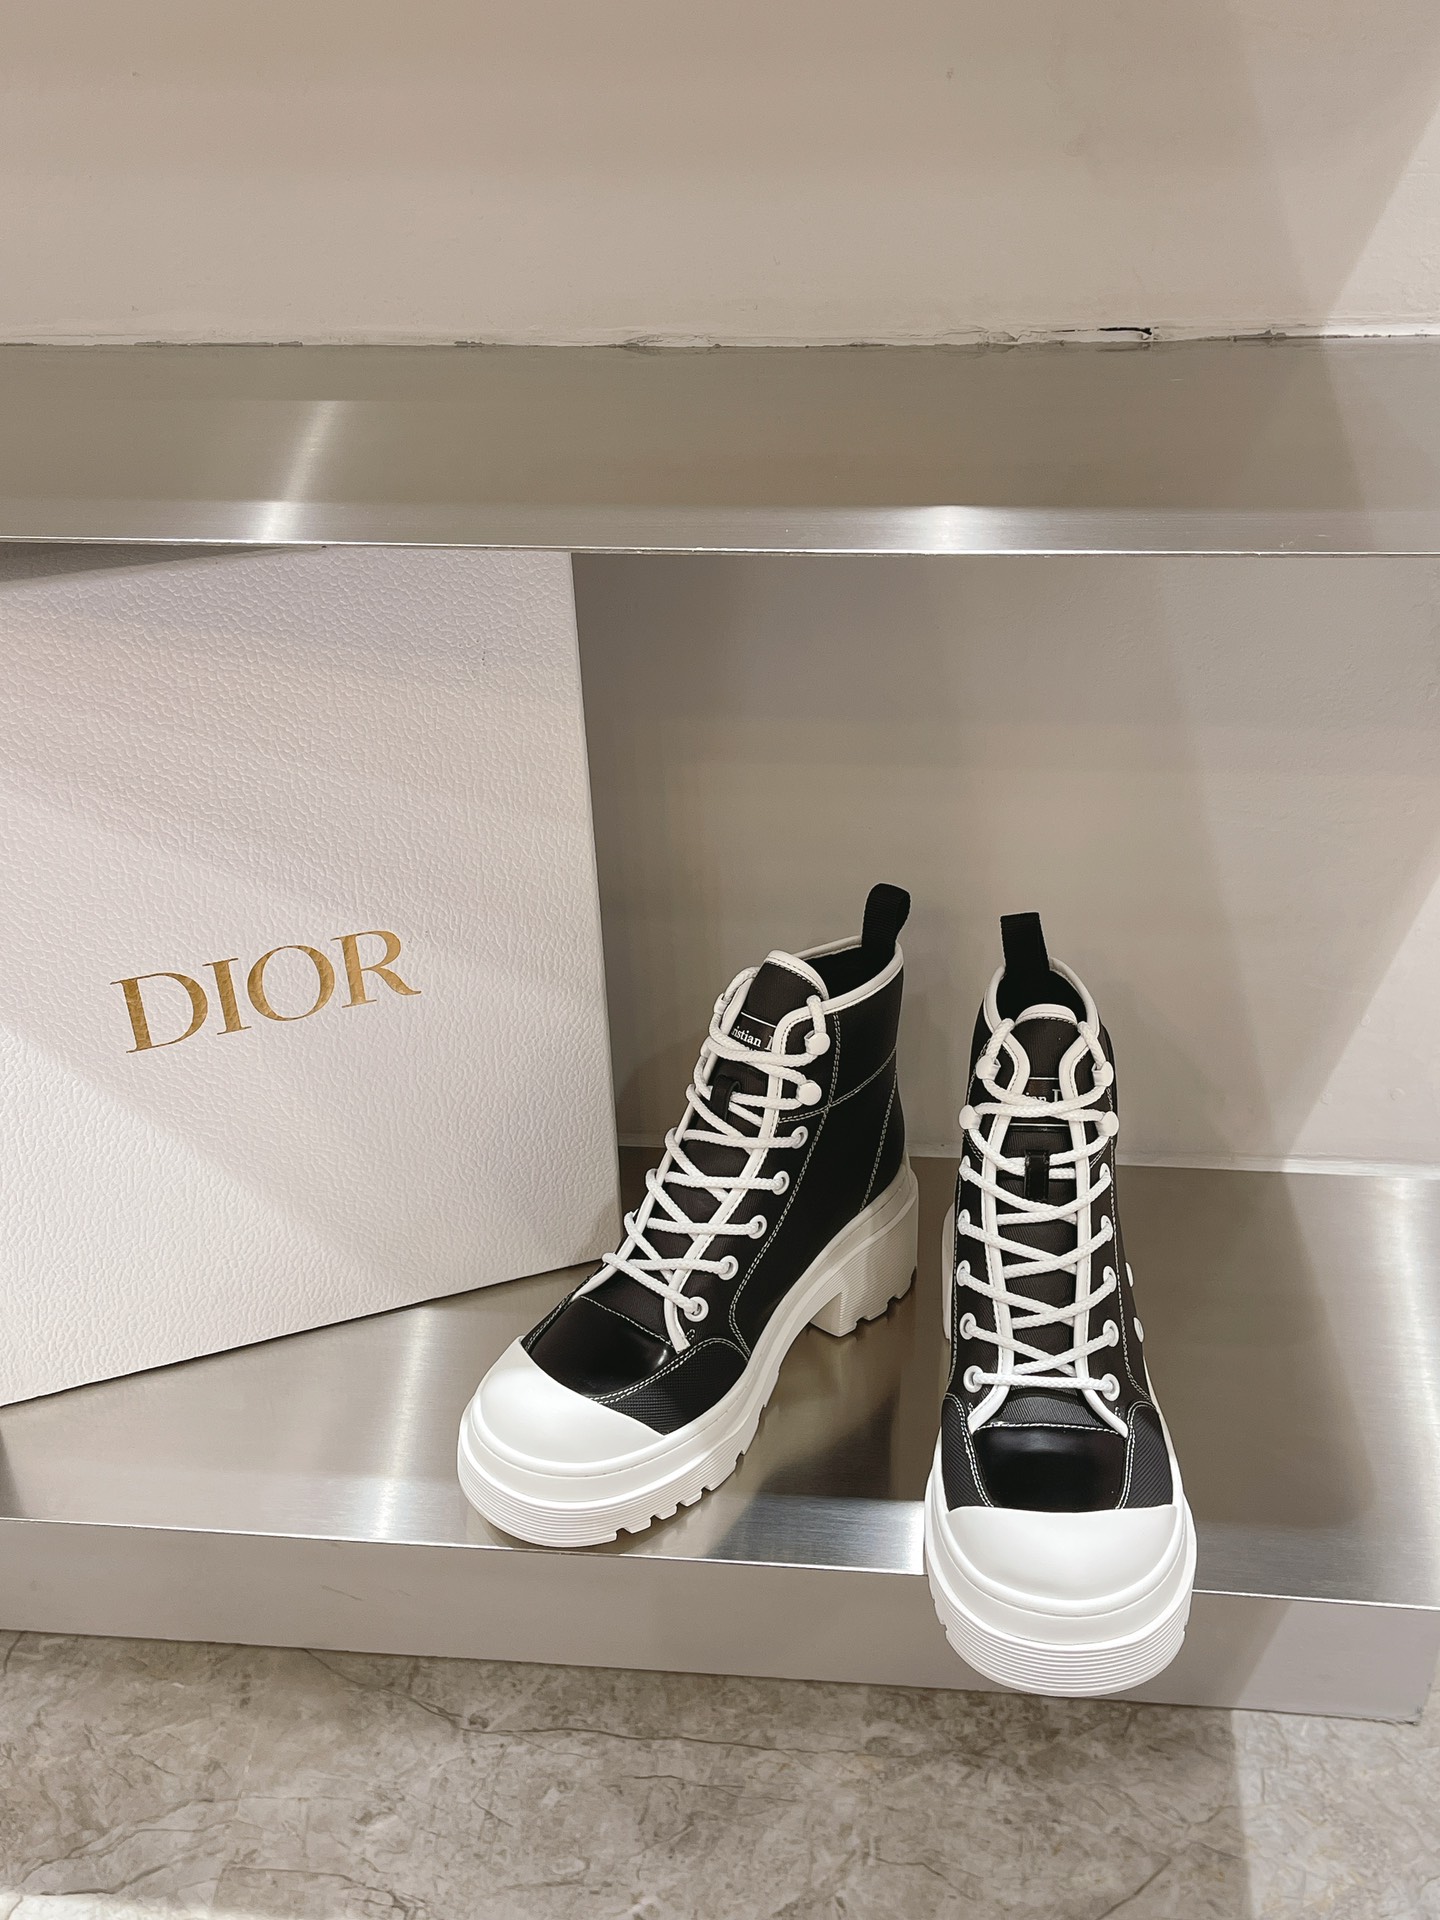 Dior Short Boots Black White Gold Hardware Calfskin Cowhide Fall/Winter Collection Vintage